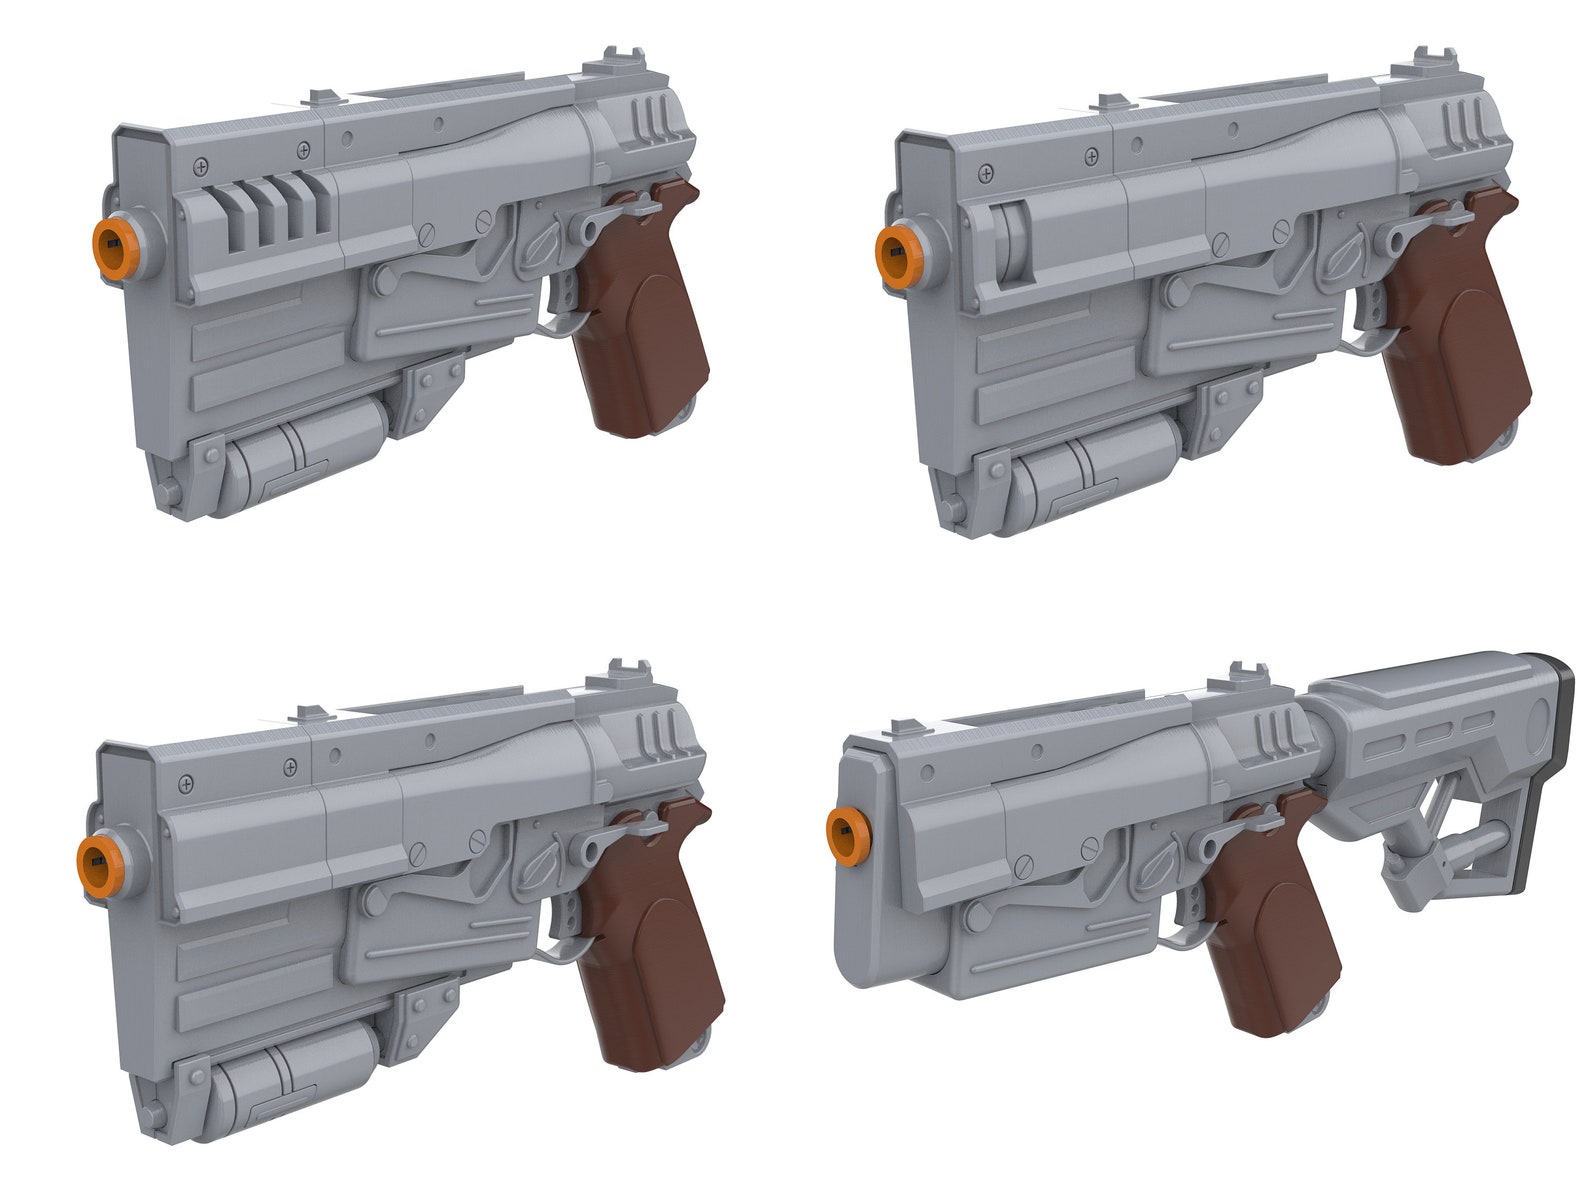 10mm pistol reanimation pack fallout 4 фото 51